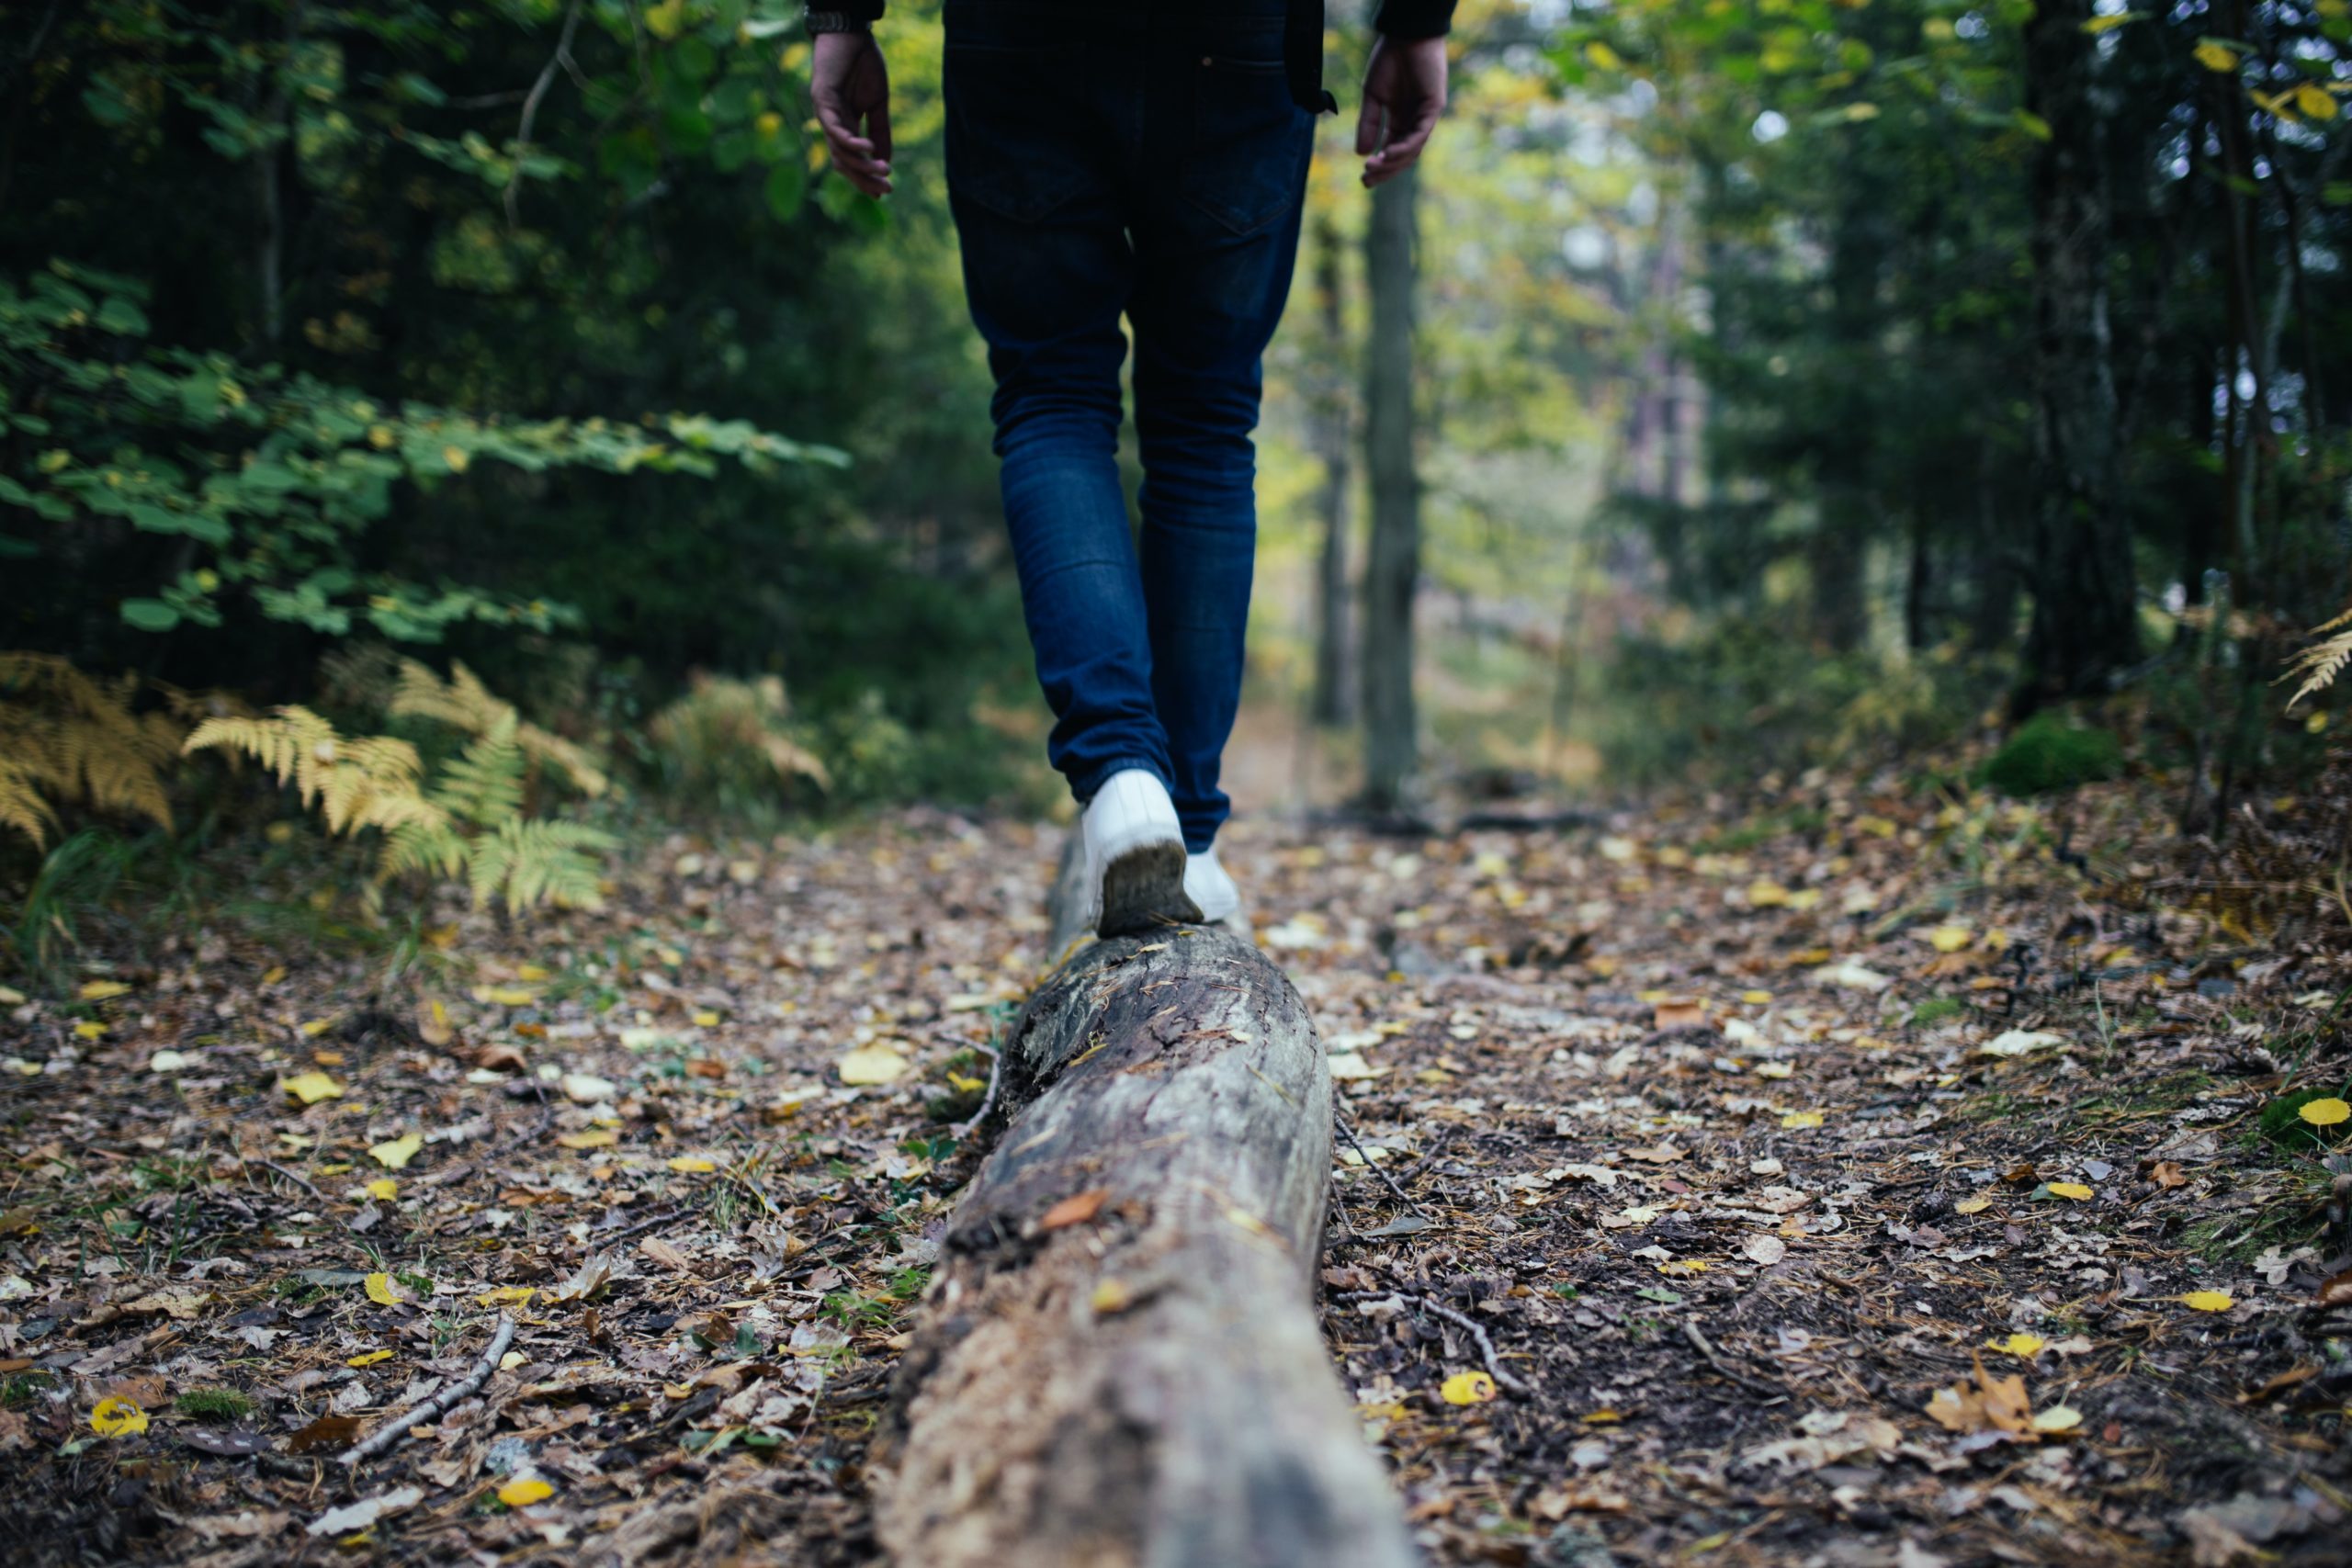 A person walking on a thin log in a bright forest, indicating balance and the ability to cope with life